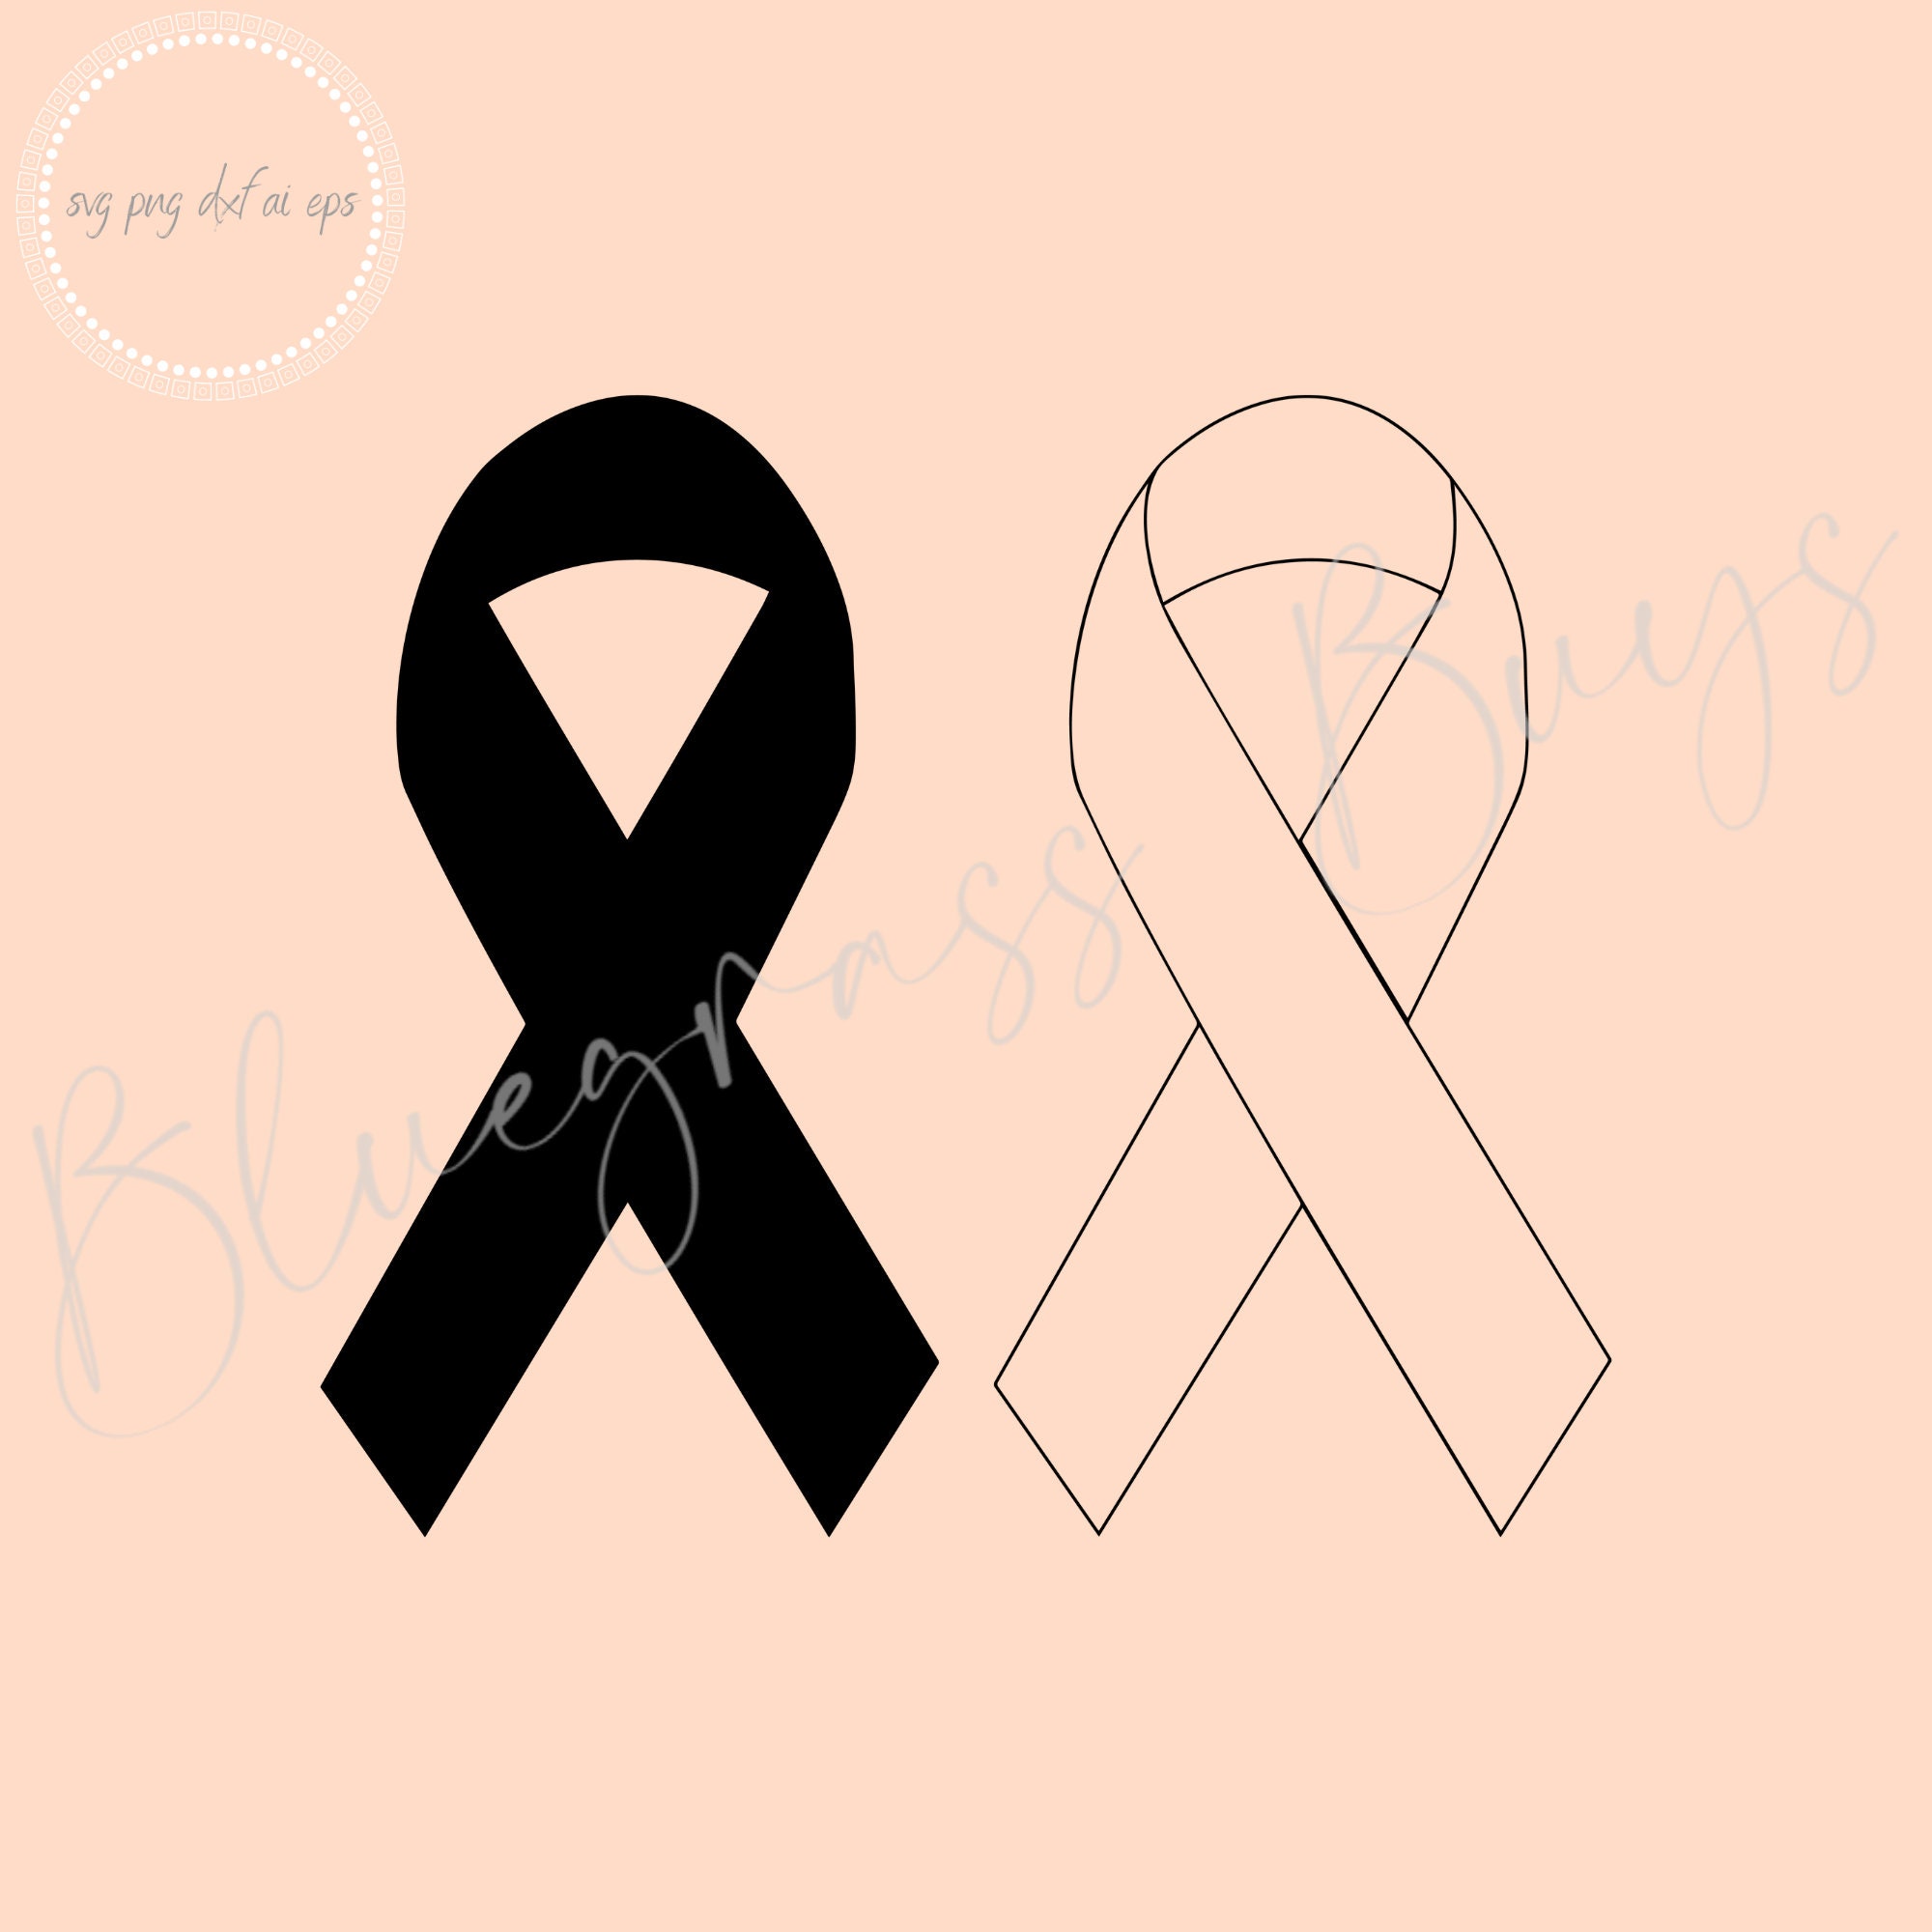 Gold Cancer Ribbon SVG Clipart Gold Cancer Ribbon Silhouette Cut